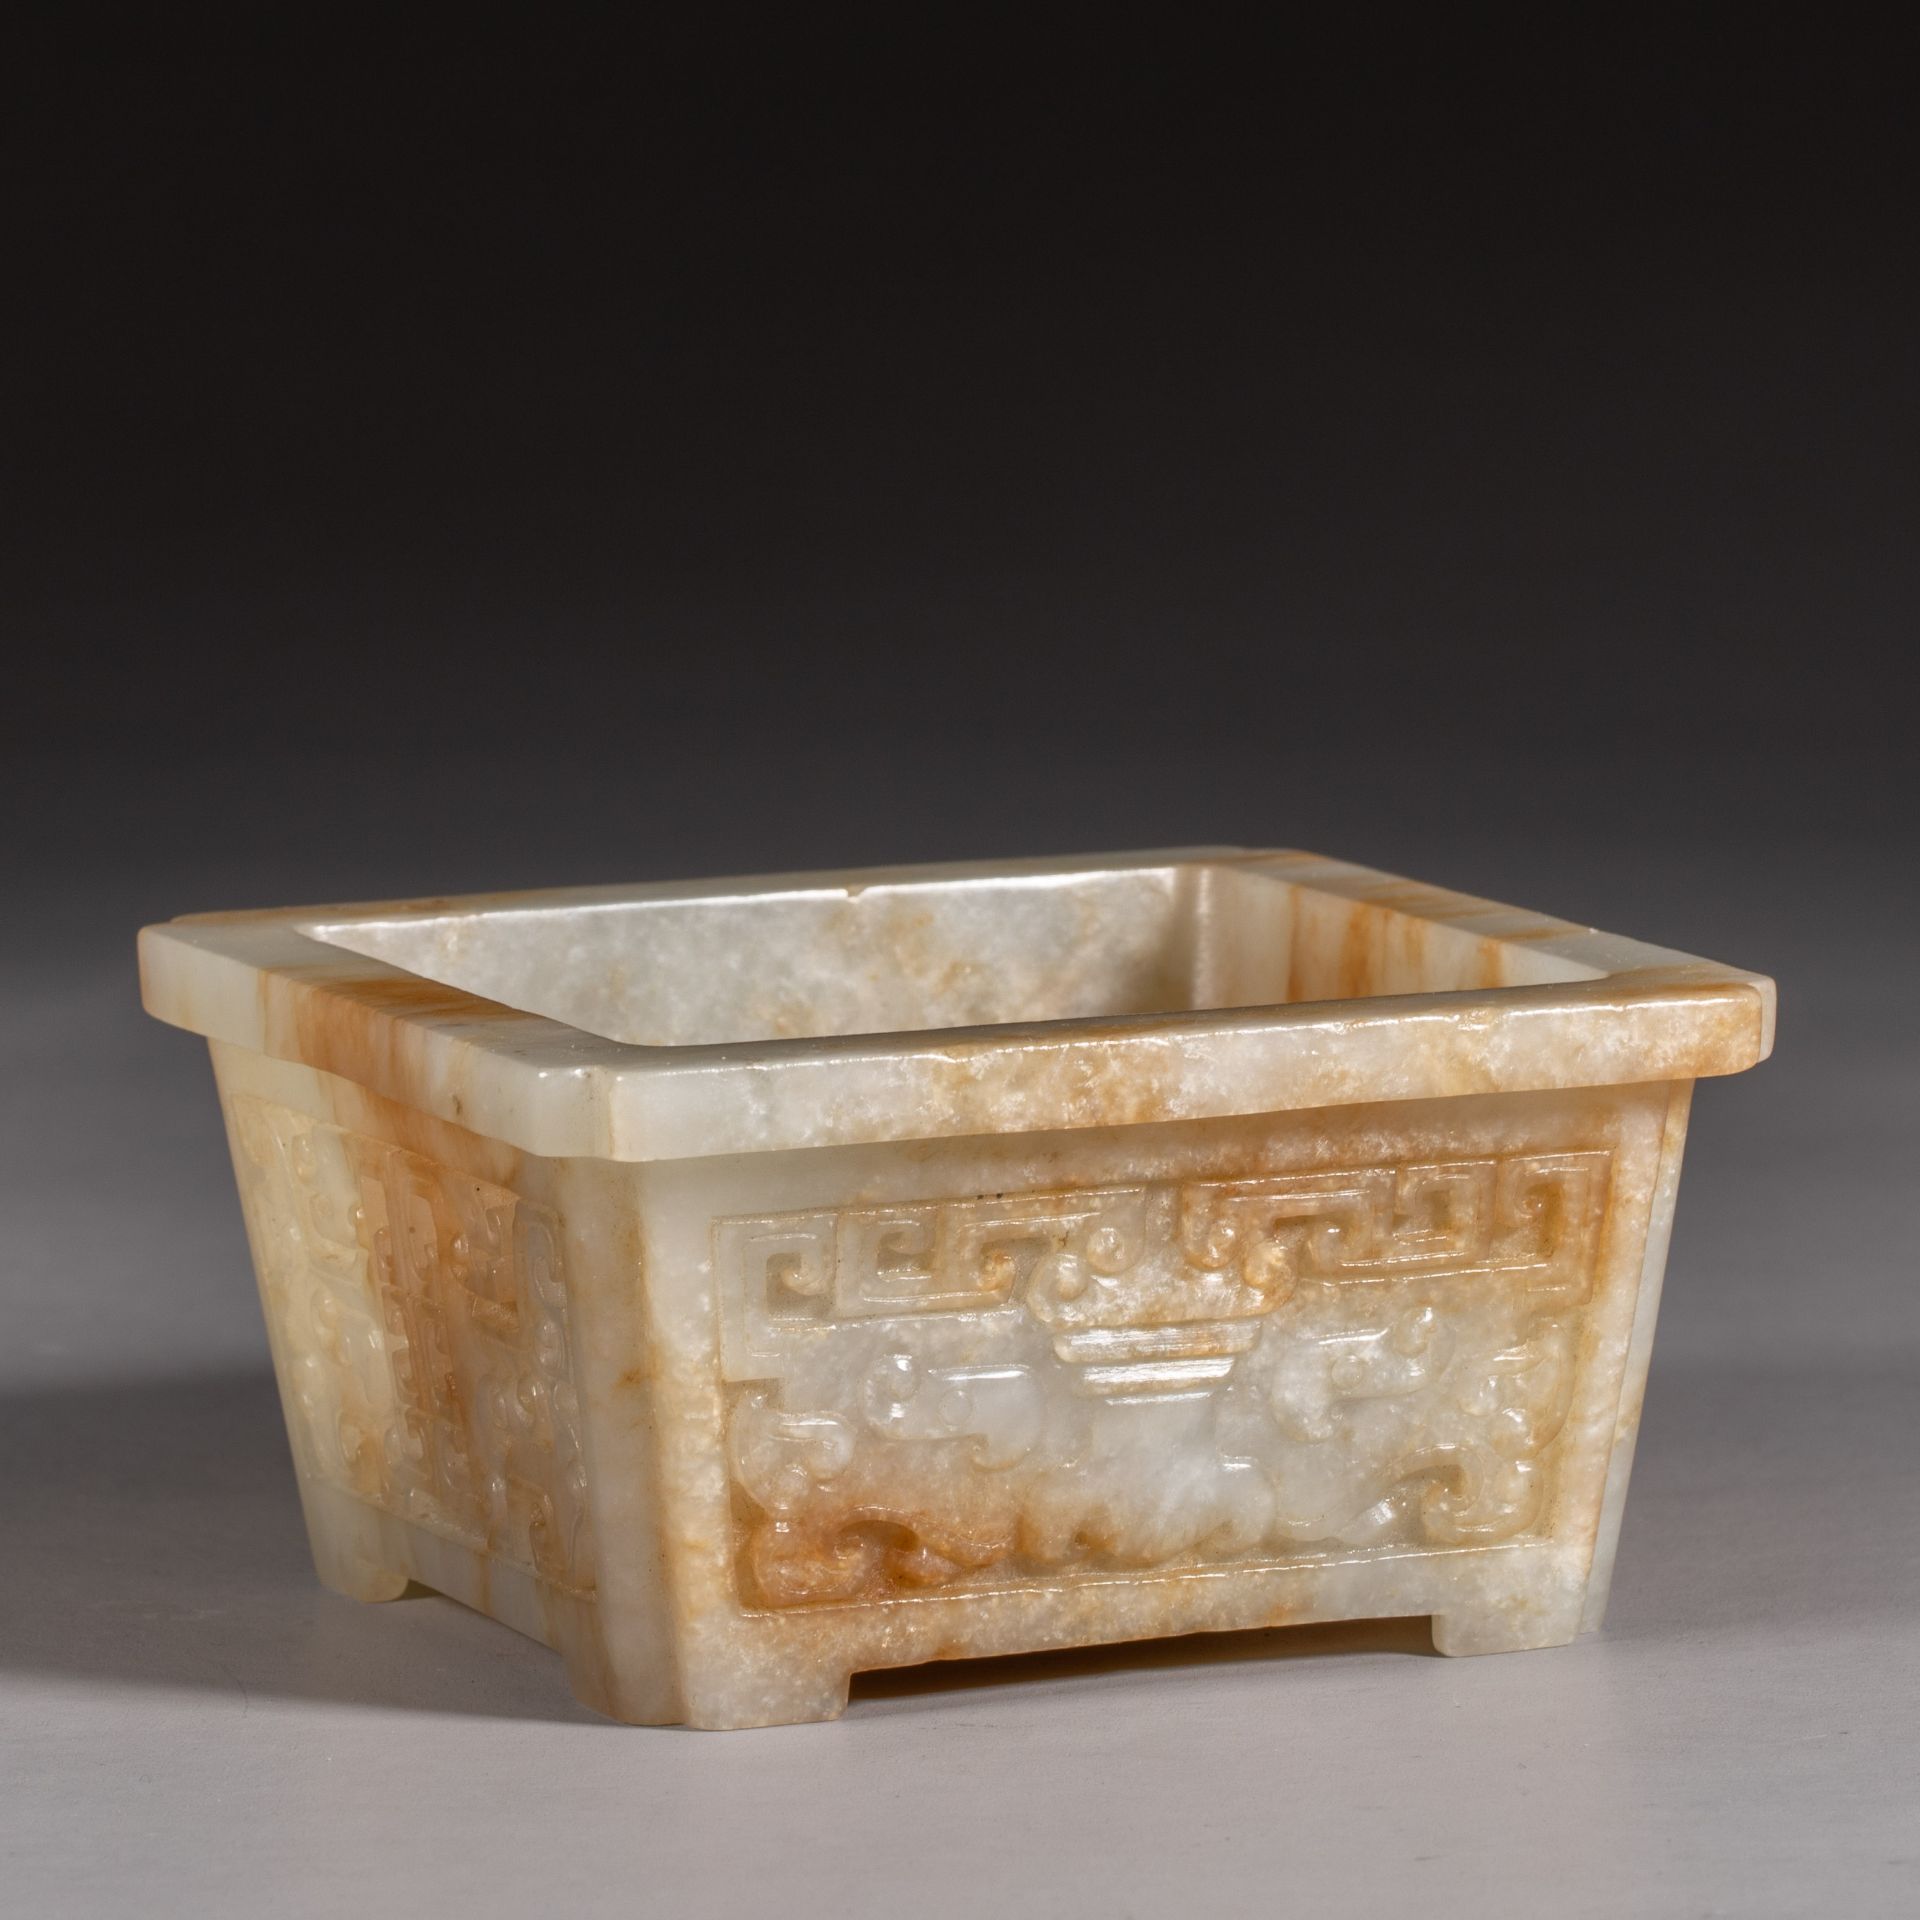 Hetian jade stove from Ming dynasty  - Image 3 of 7